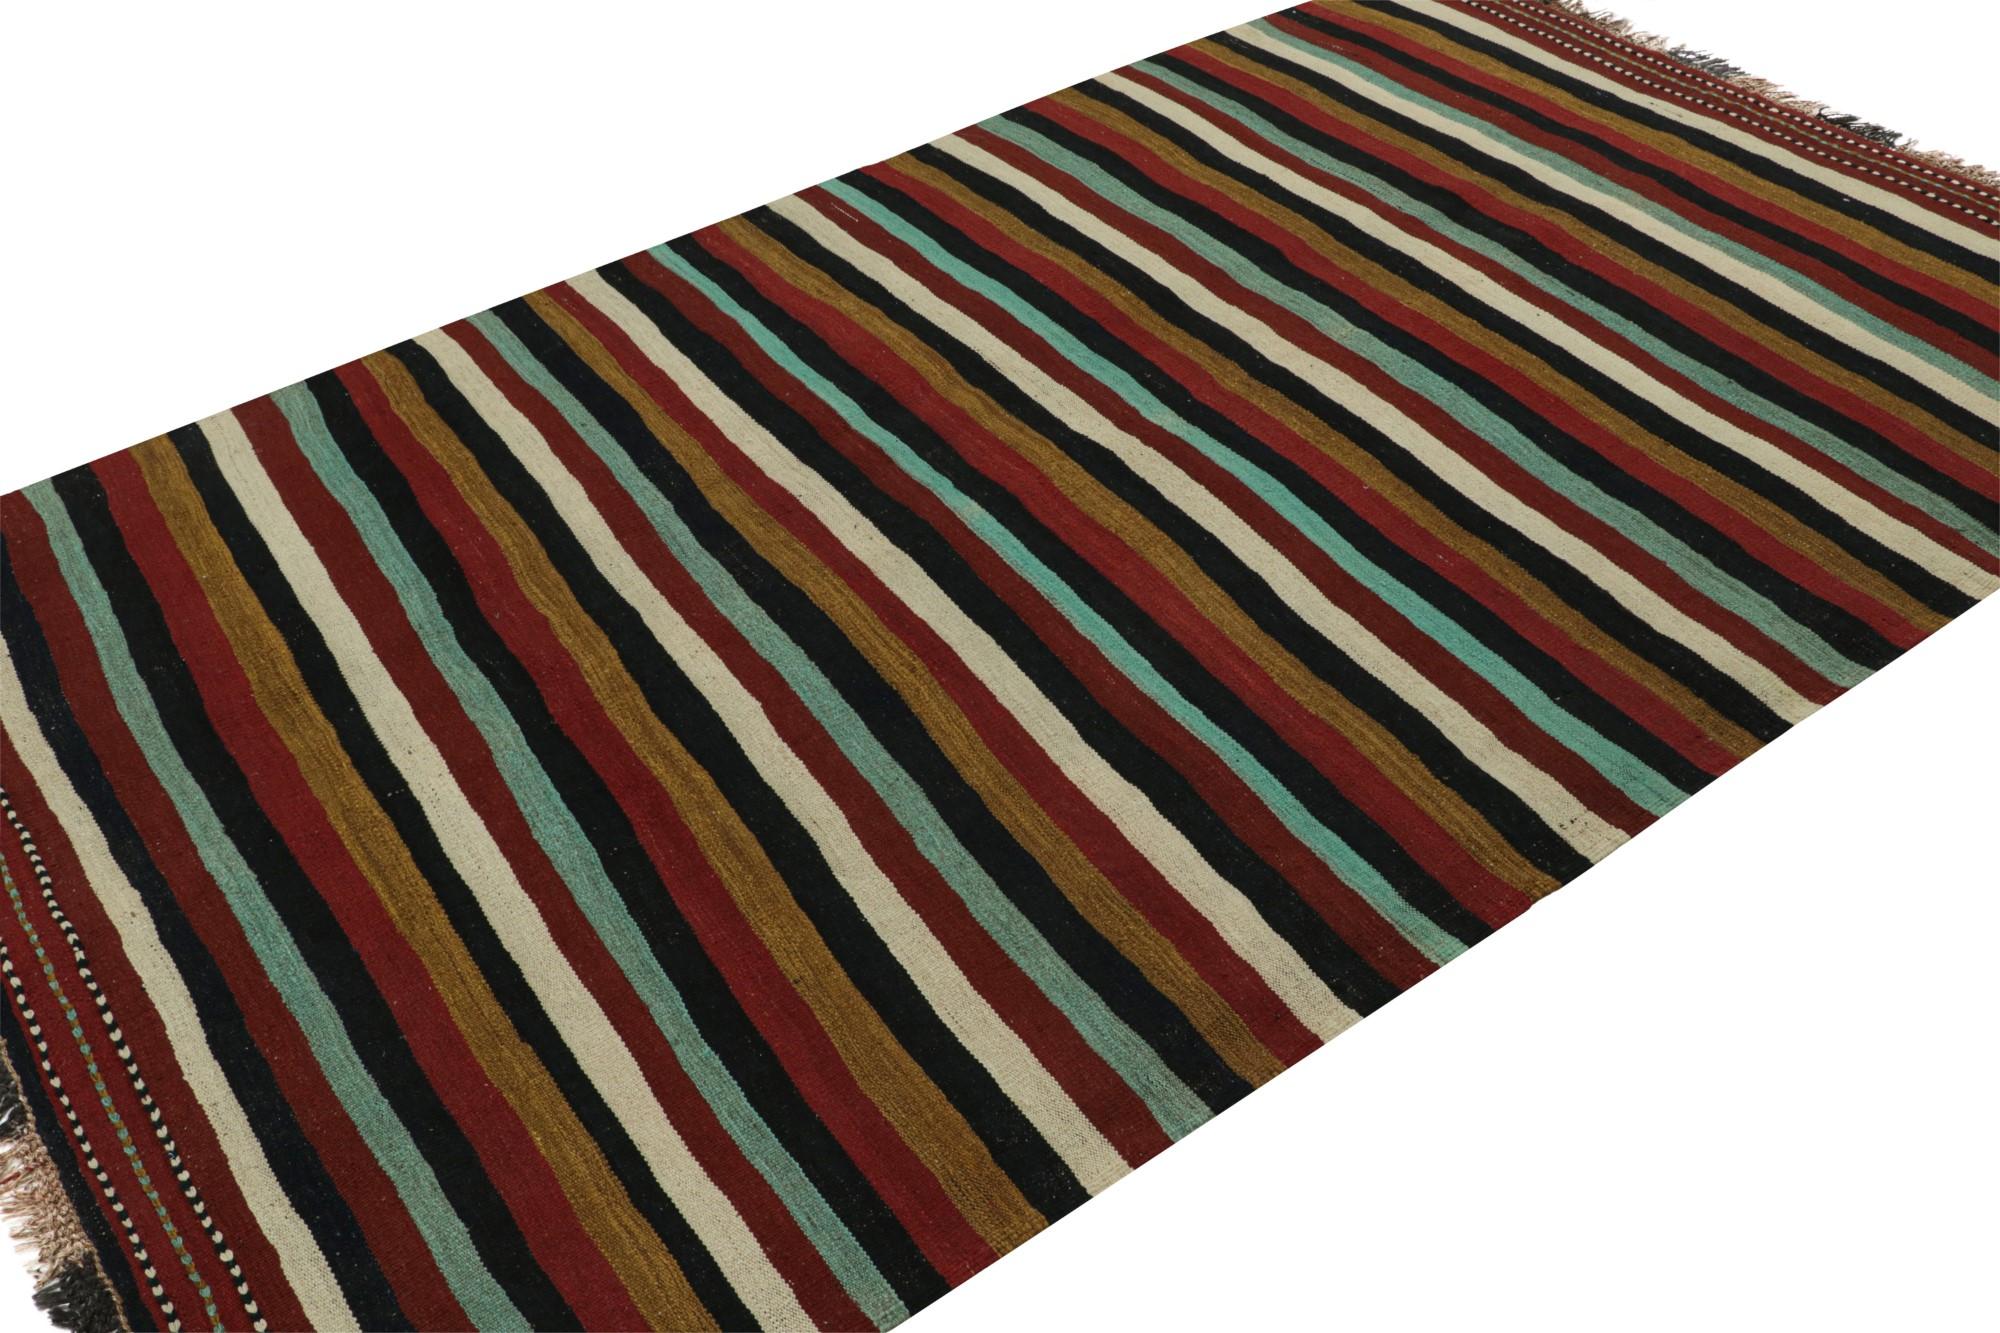 Hand knotted in wool, this 6x10 vintage Afghan tribal kilim rug, originating circa 1950-1960, is an exciting new addition to the Rug & Kilim collection.  

On the design: 

Originating from Afghanistan, this rug is a rich versatile piece reflecting